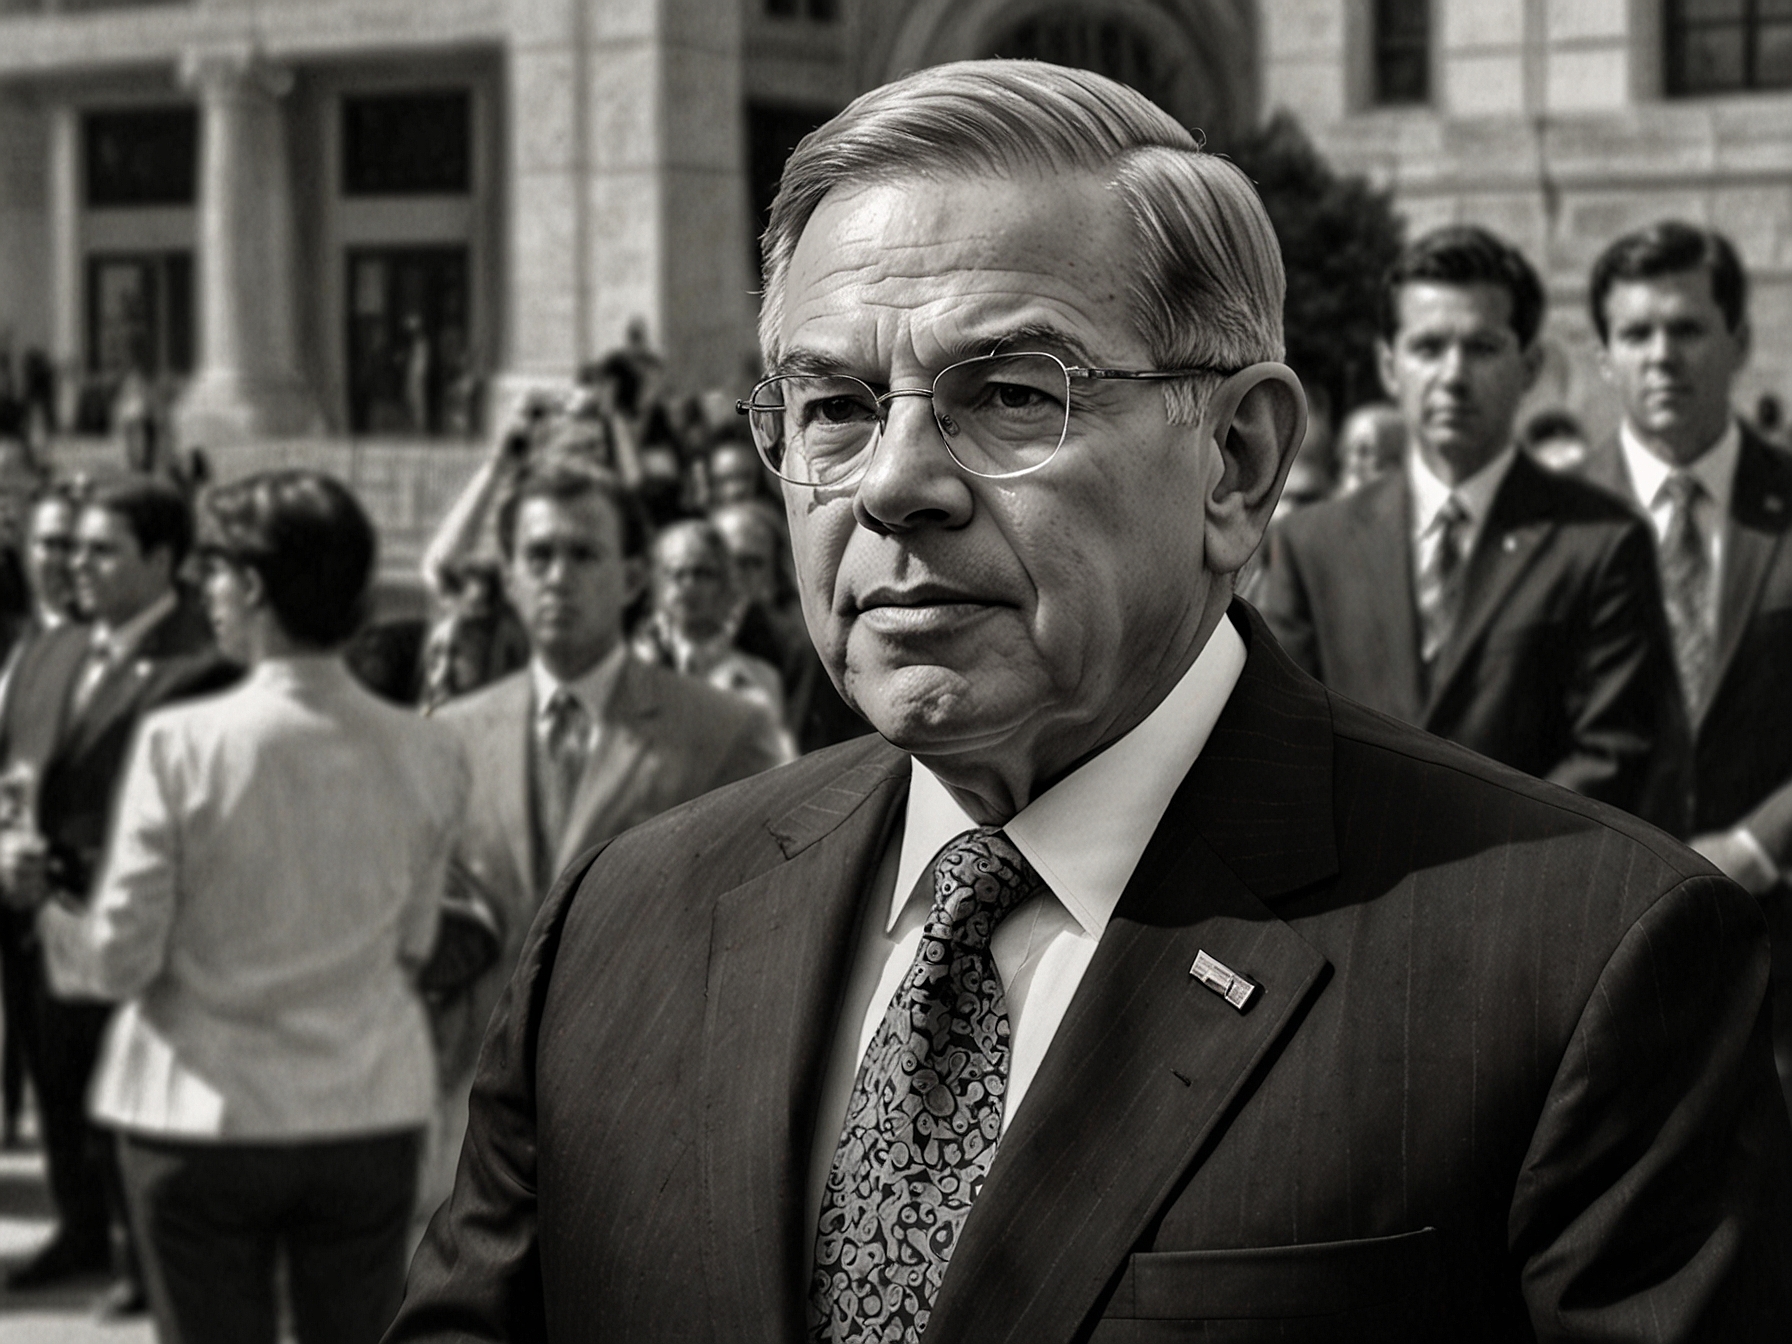 Sen. Bob Menendez outside the courthouse, surrounded by media and supporters, highlighting the high public and political stakes of his ongoing bribery trial.